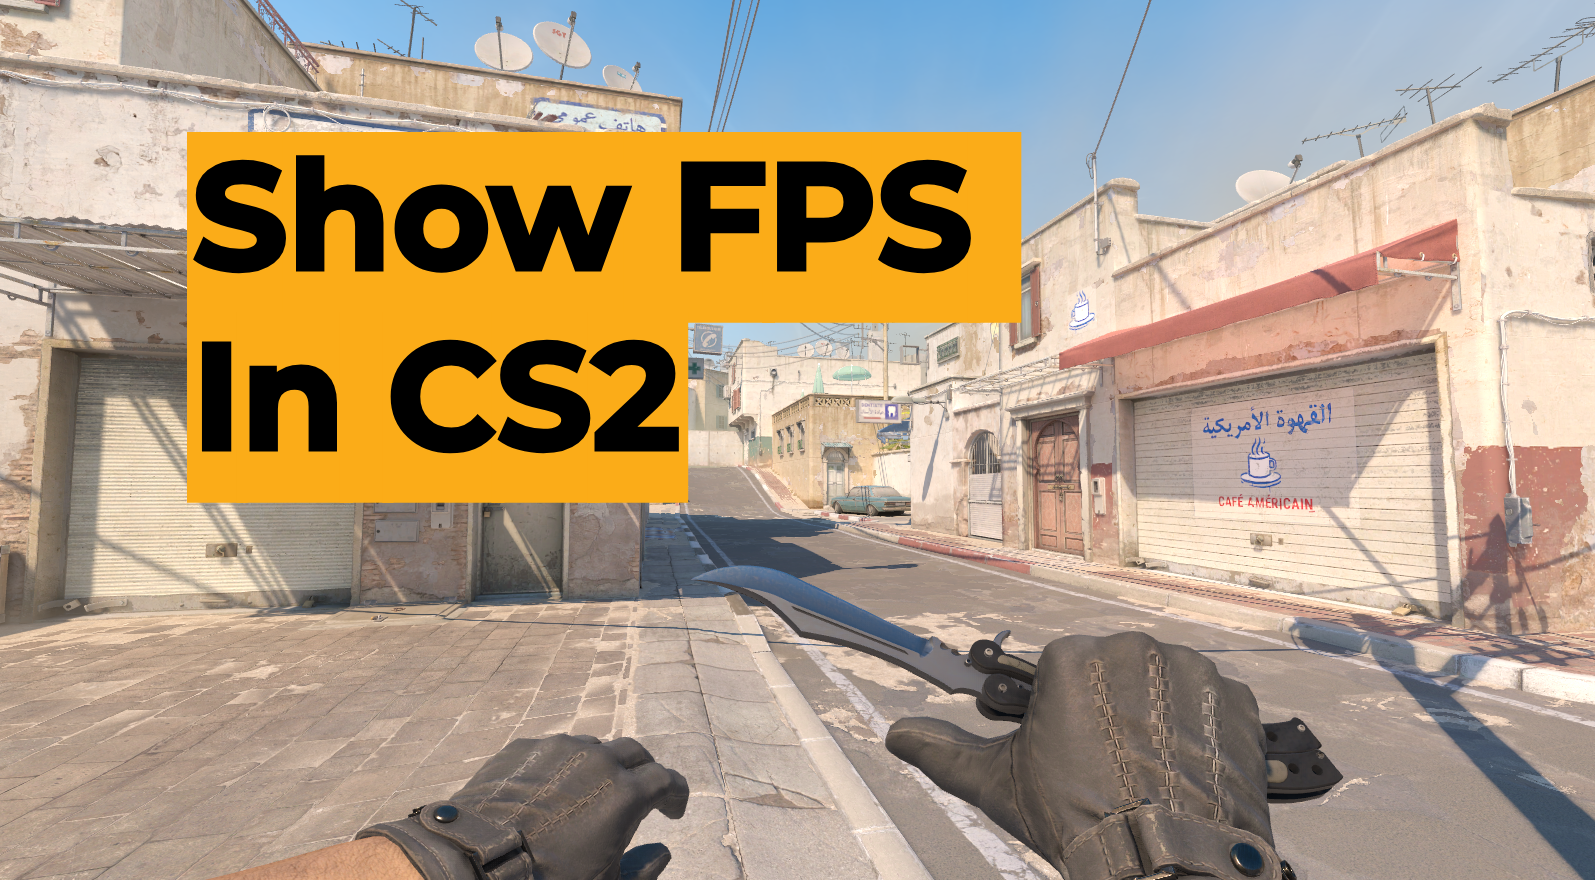 How to Show FPS in CS2 (3 Methods Explained)Featured Image